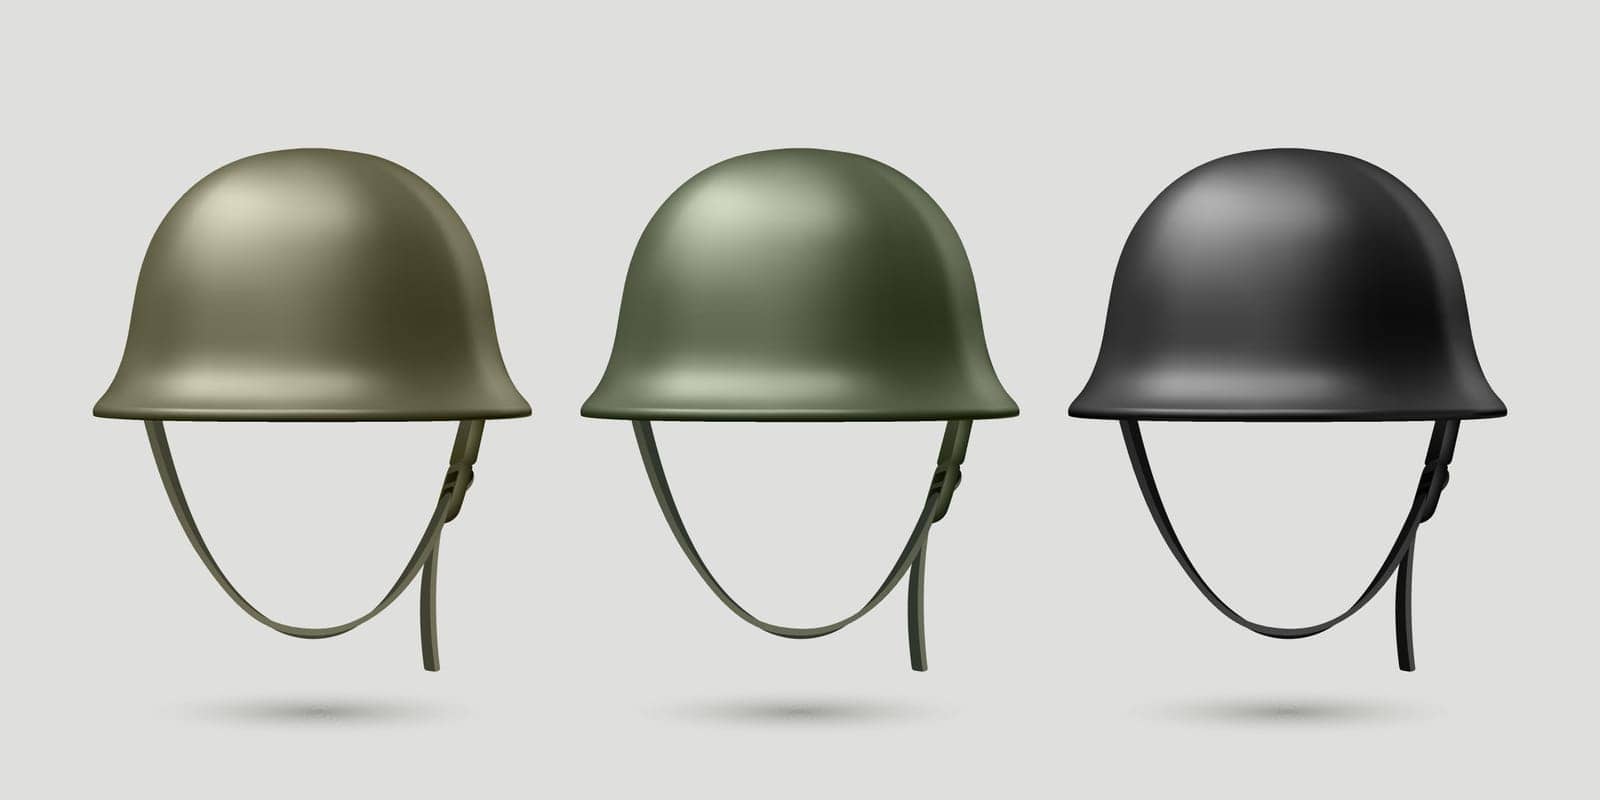 Vector 3d Realistic Military Protect Helmet Set Closeup Isolated. Helmet, Army Symbol of Defense and Protect. Soldier Helmet Design Template.